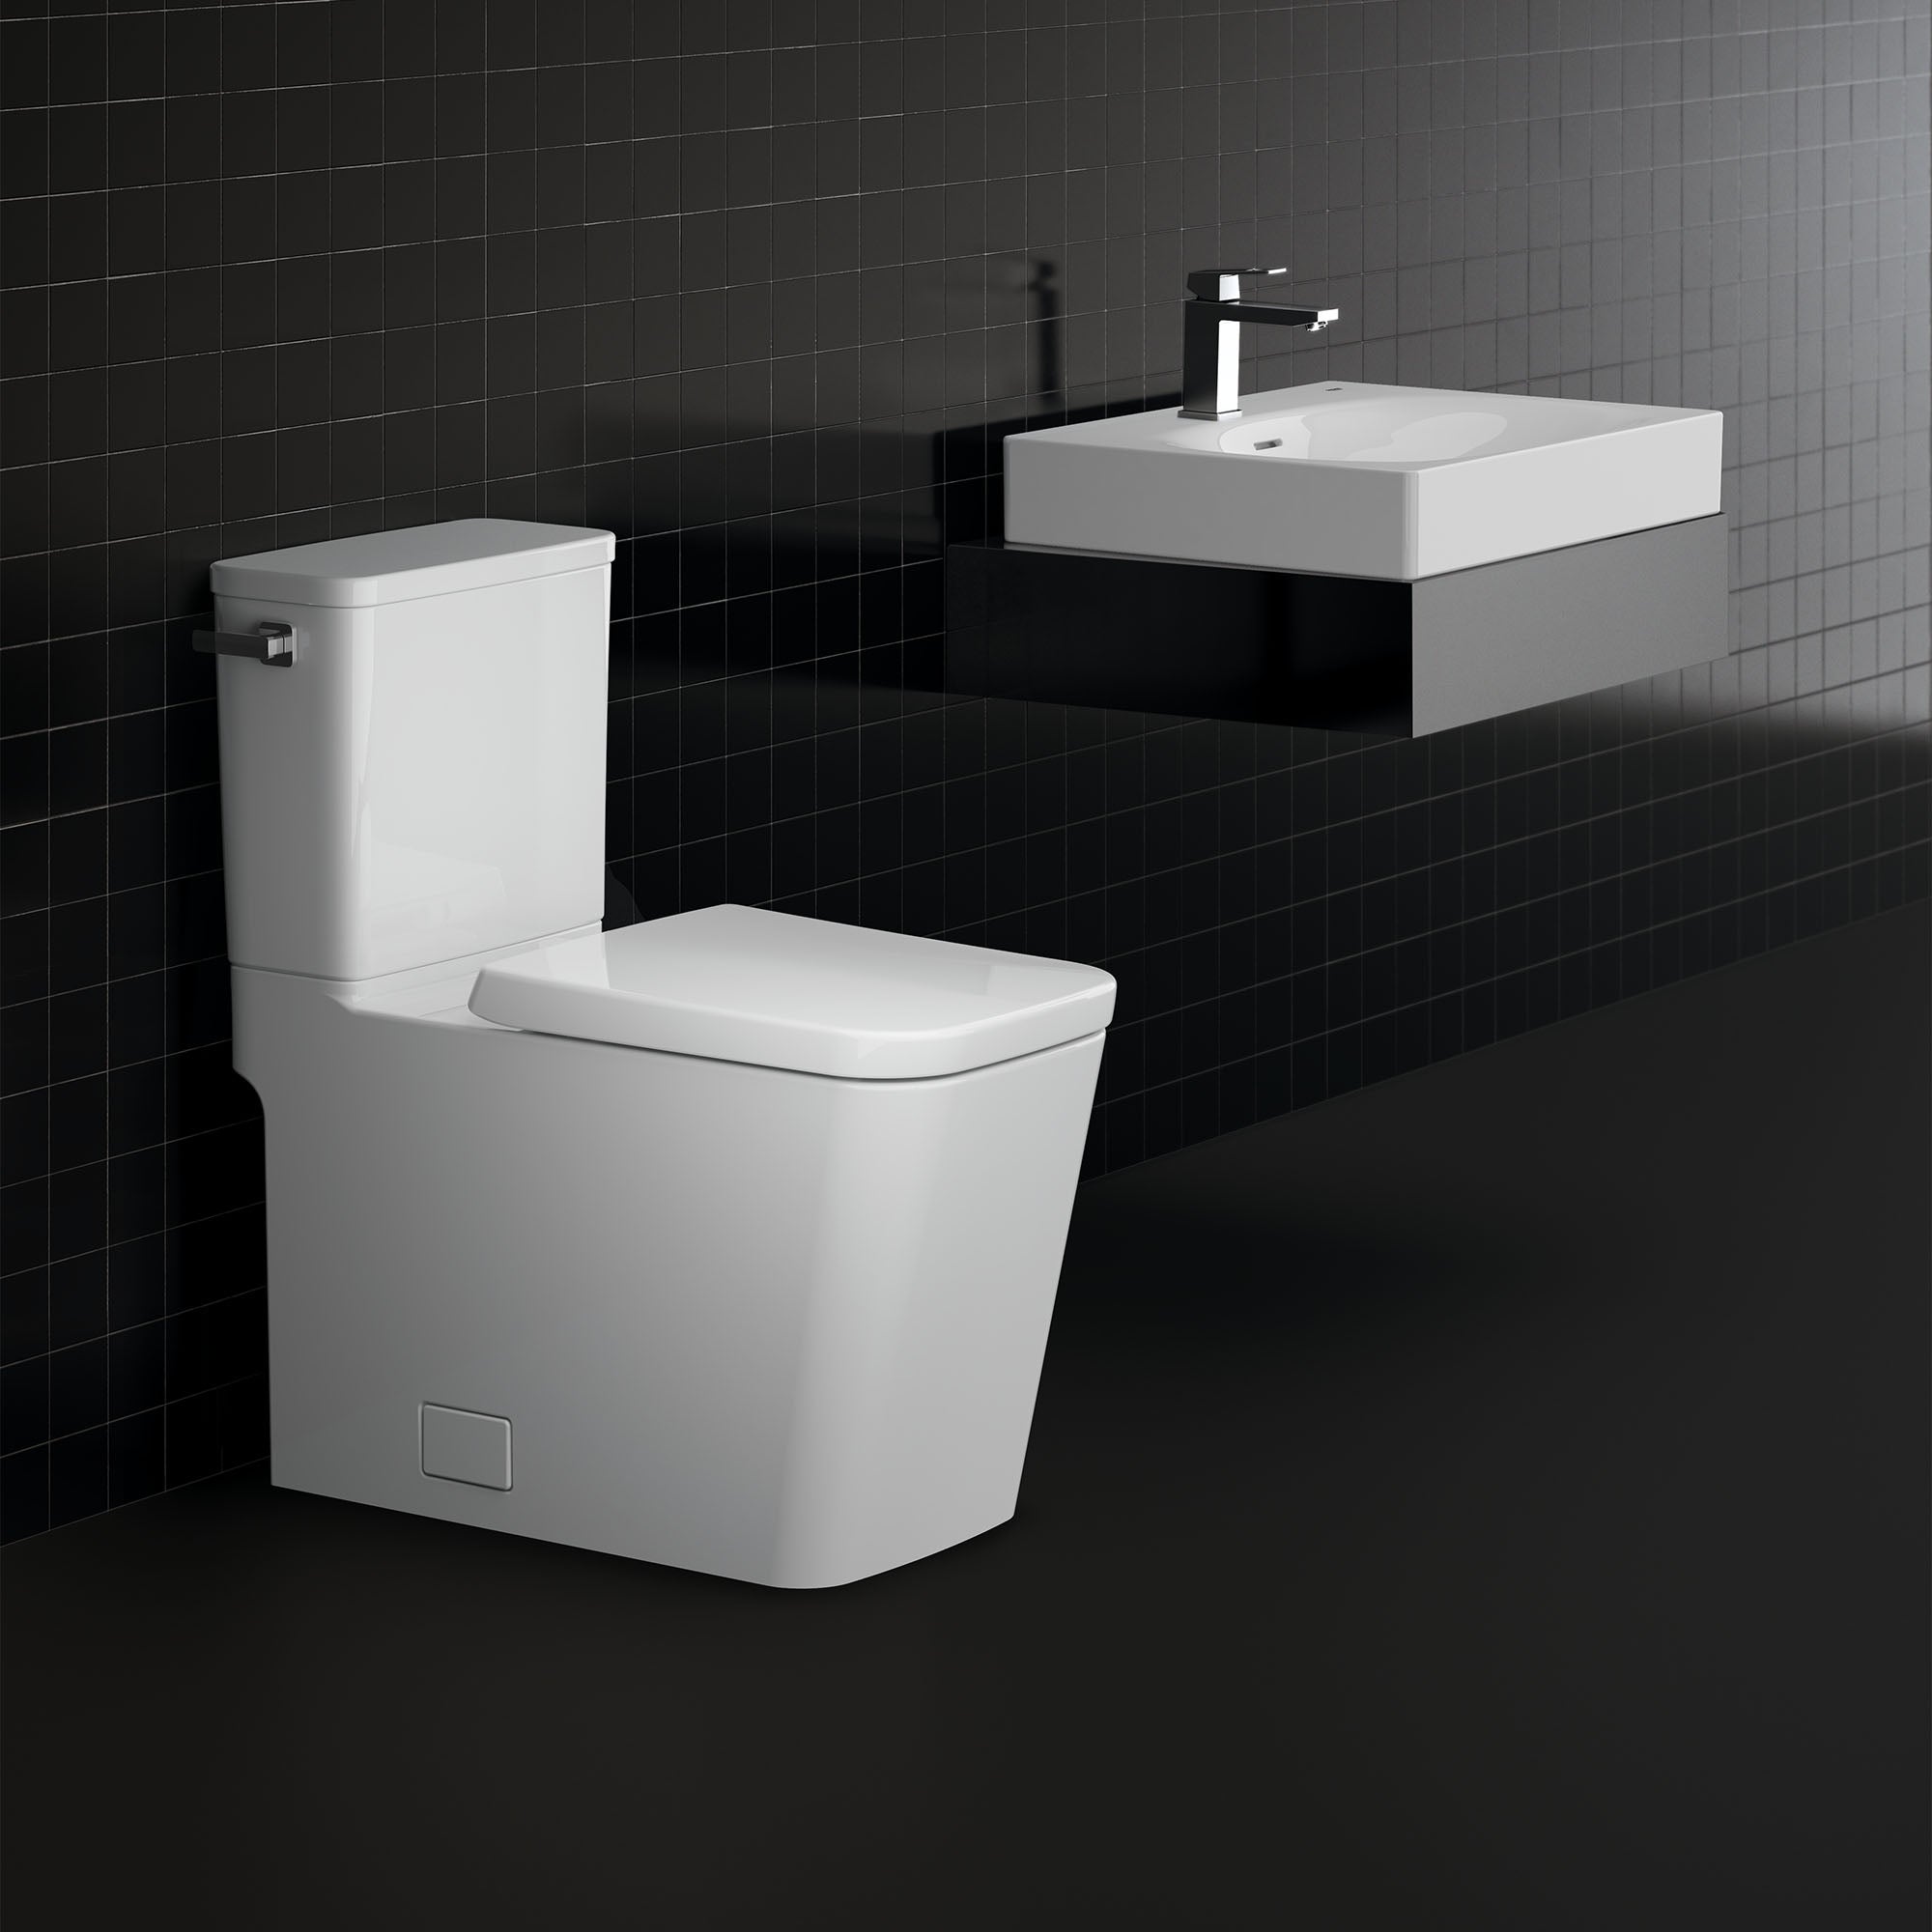 GROHE EUROCUBE TWO PC TOILET W/ LEFTHAND LEVER